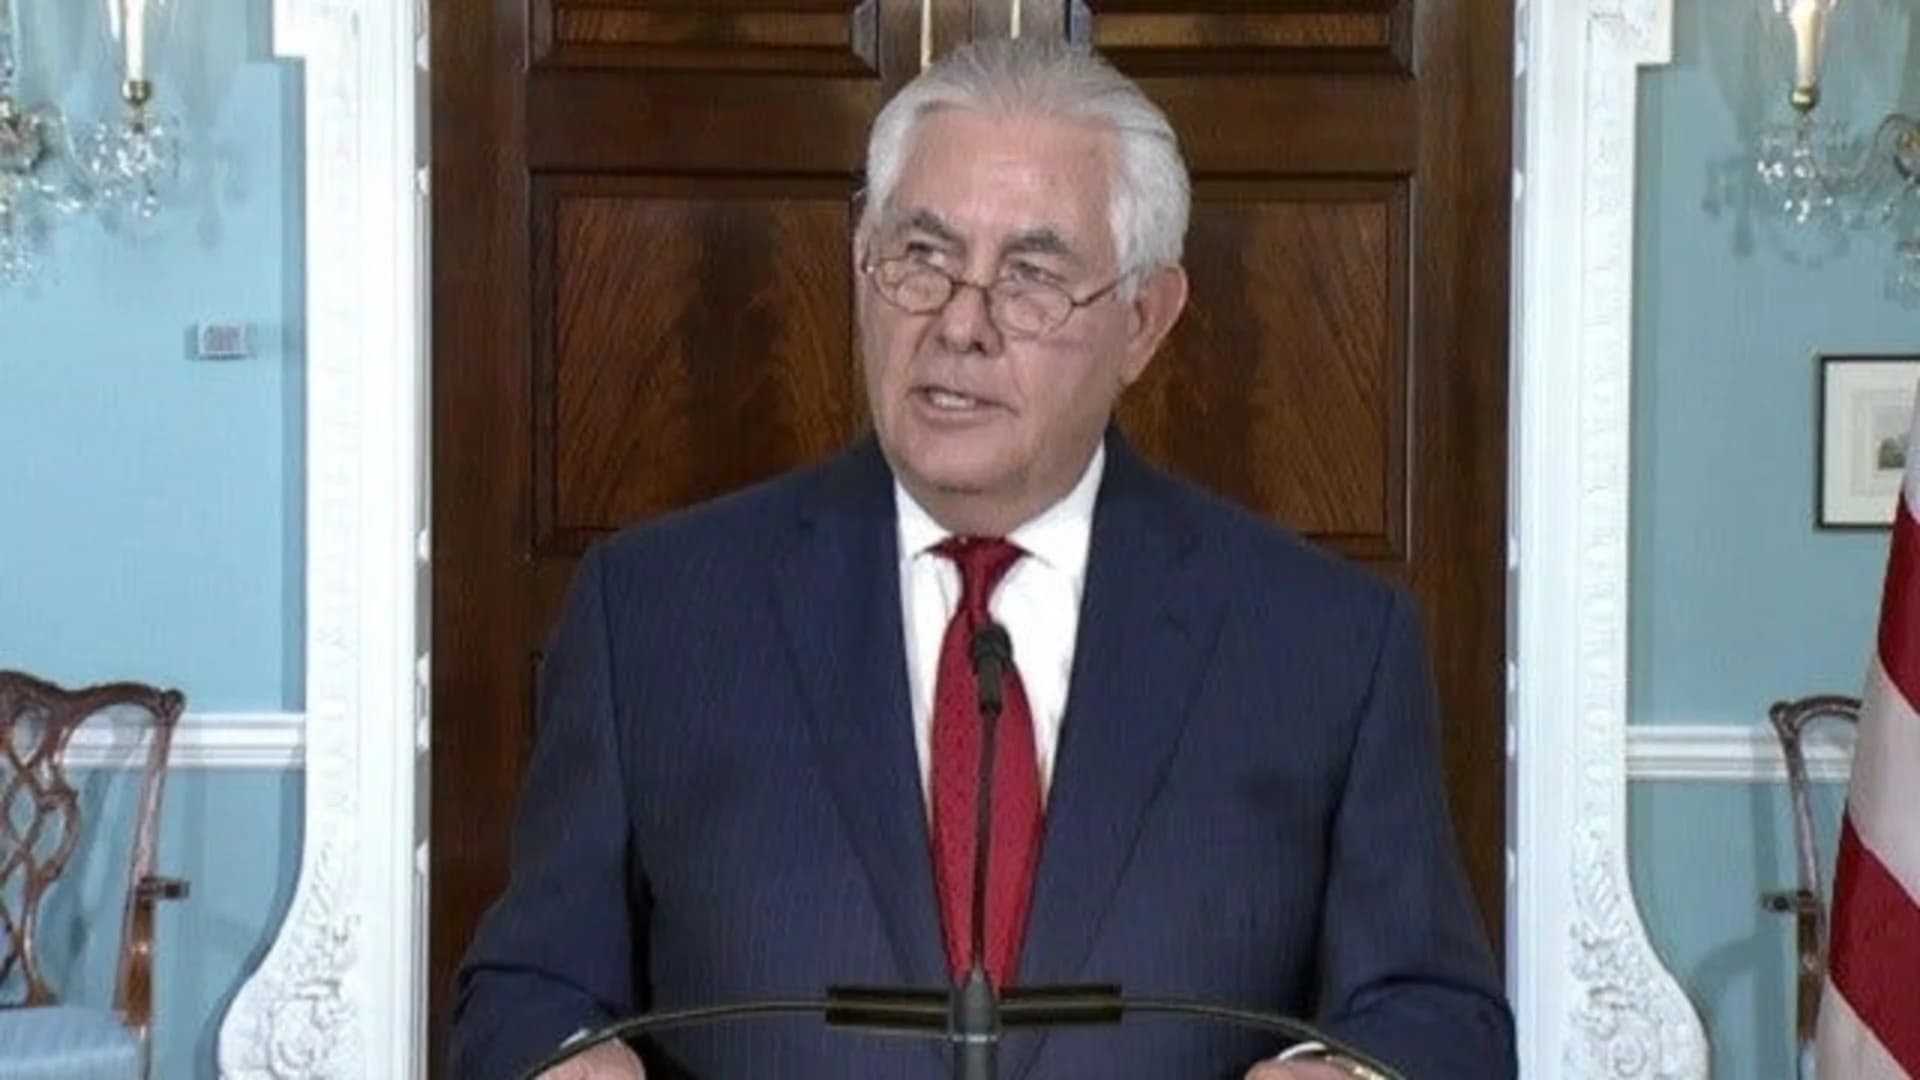 Tillerson denies he weighed resigning or called boss 'moron'